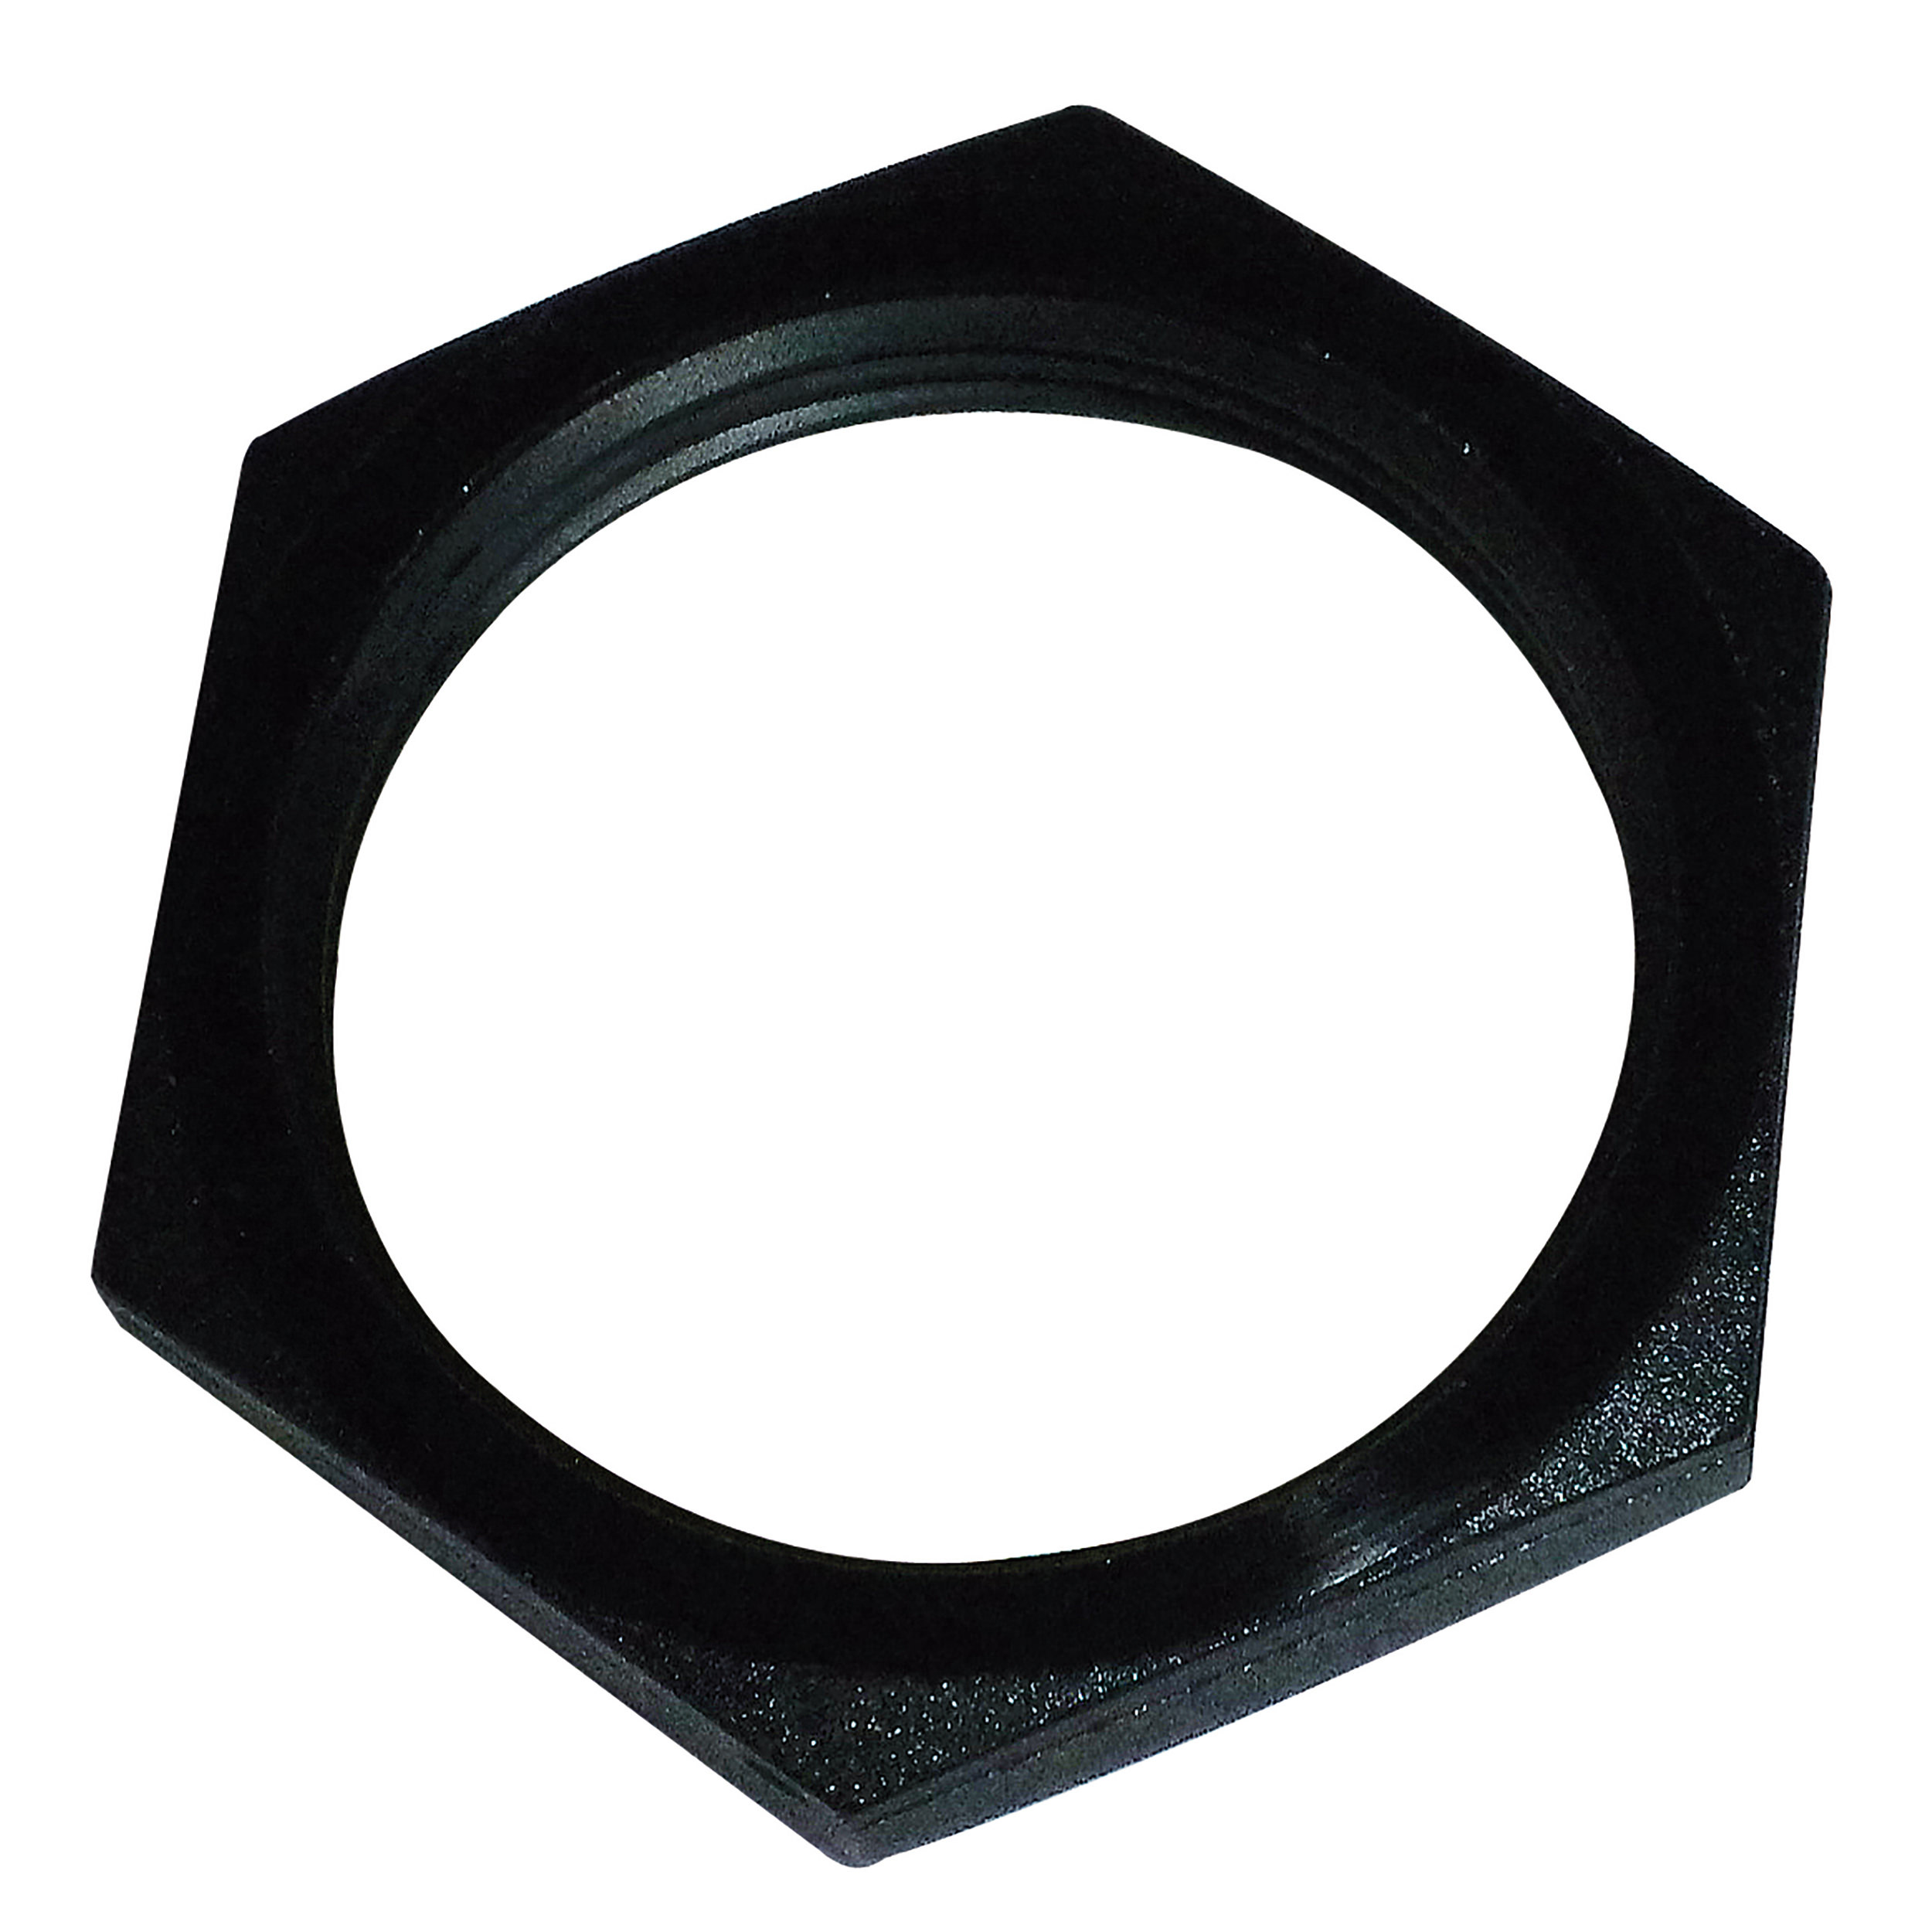 Nut variobloc, for control panel mounting, suitable für: BG 20, BG 30, dimensions: M30 × 1.5, material: PA 6